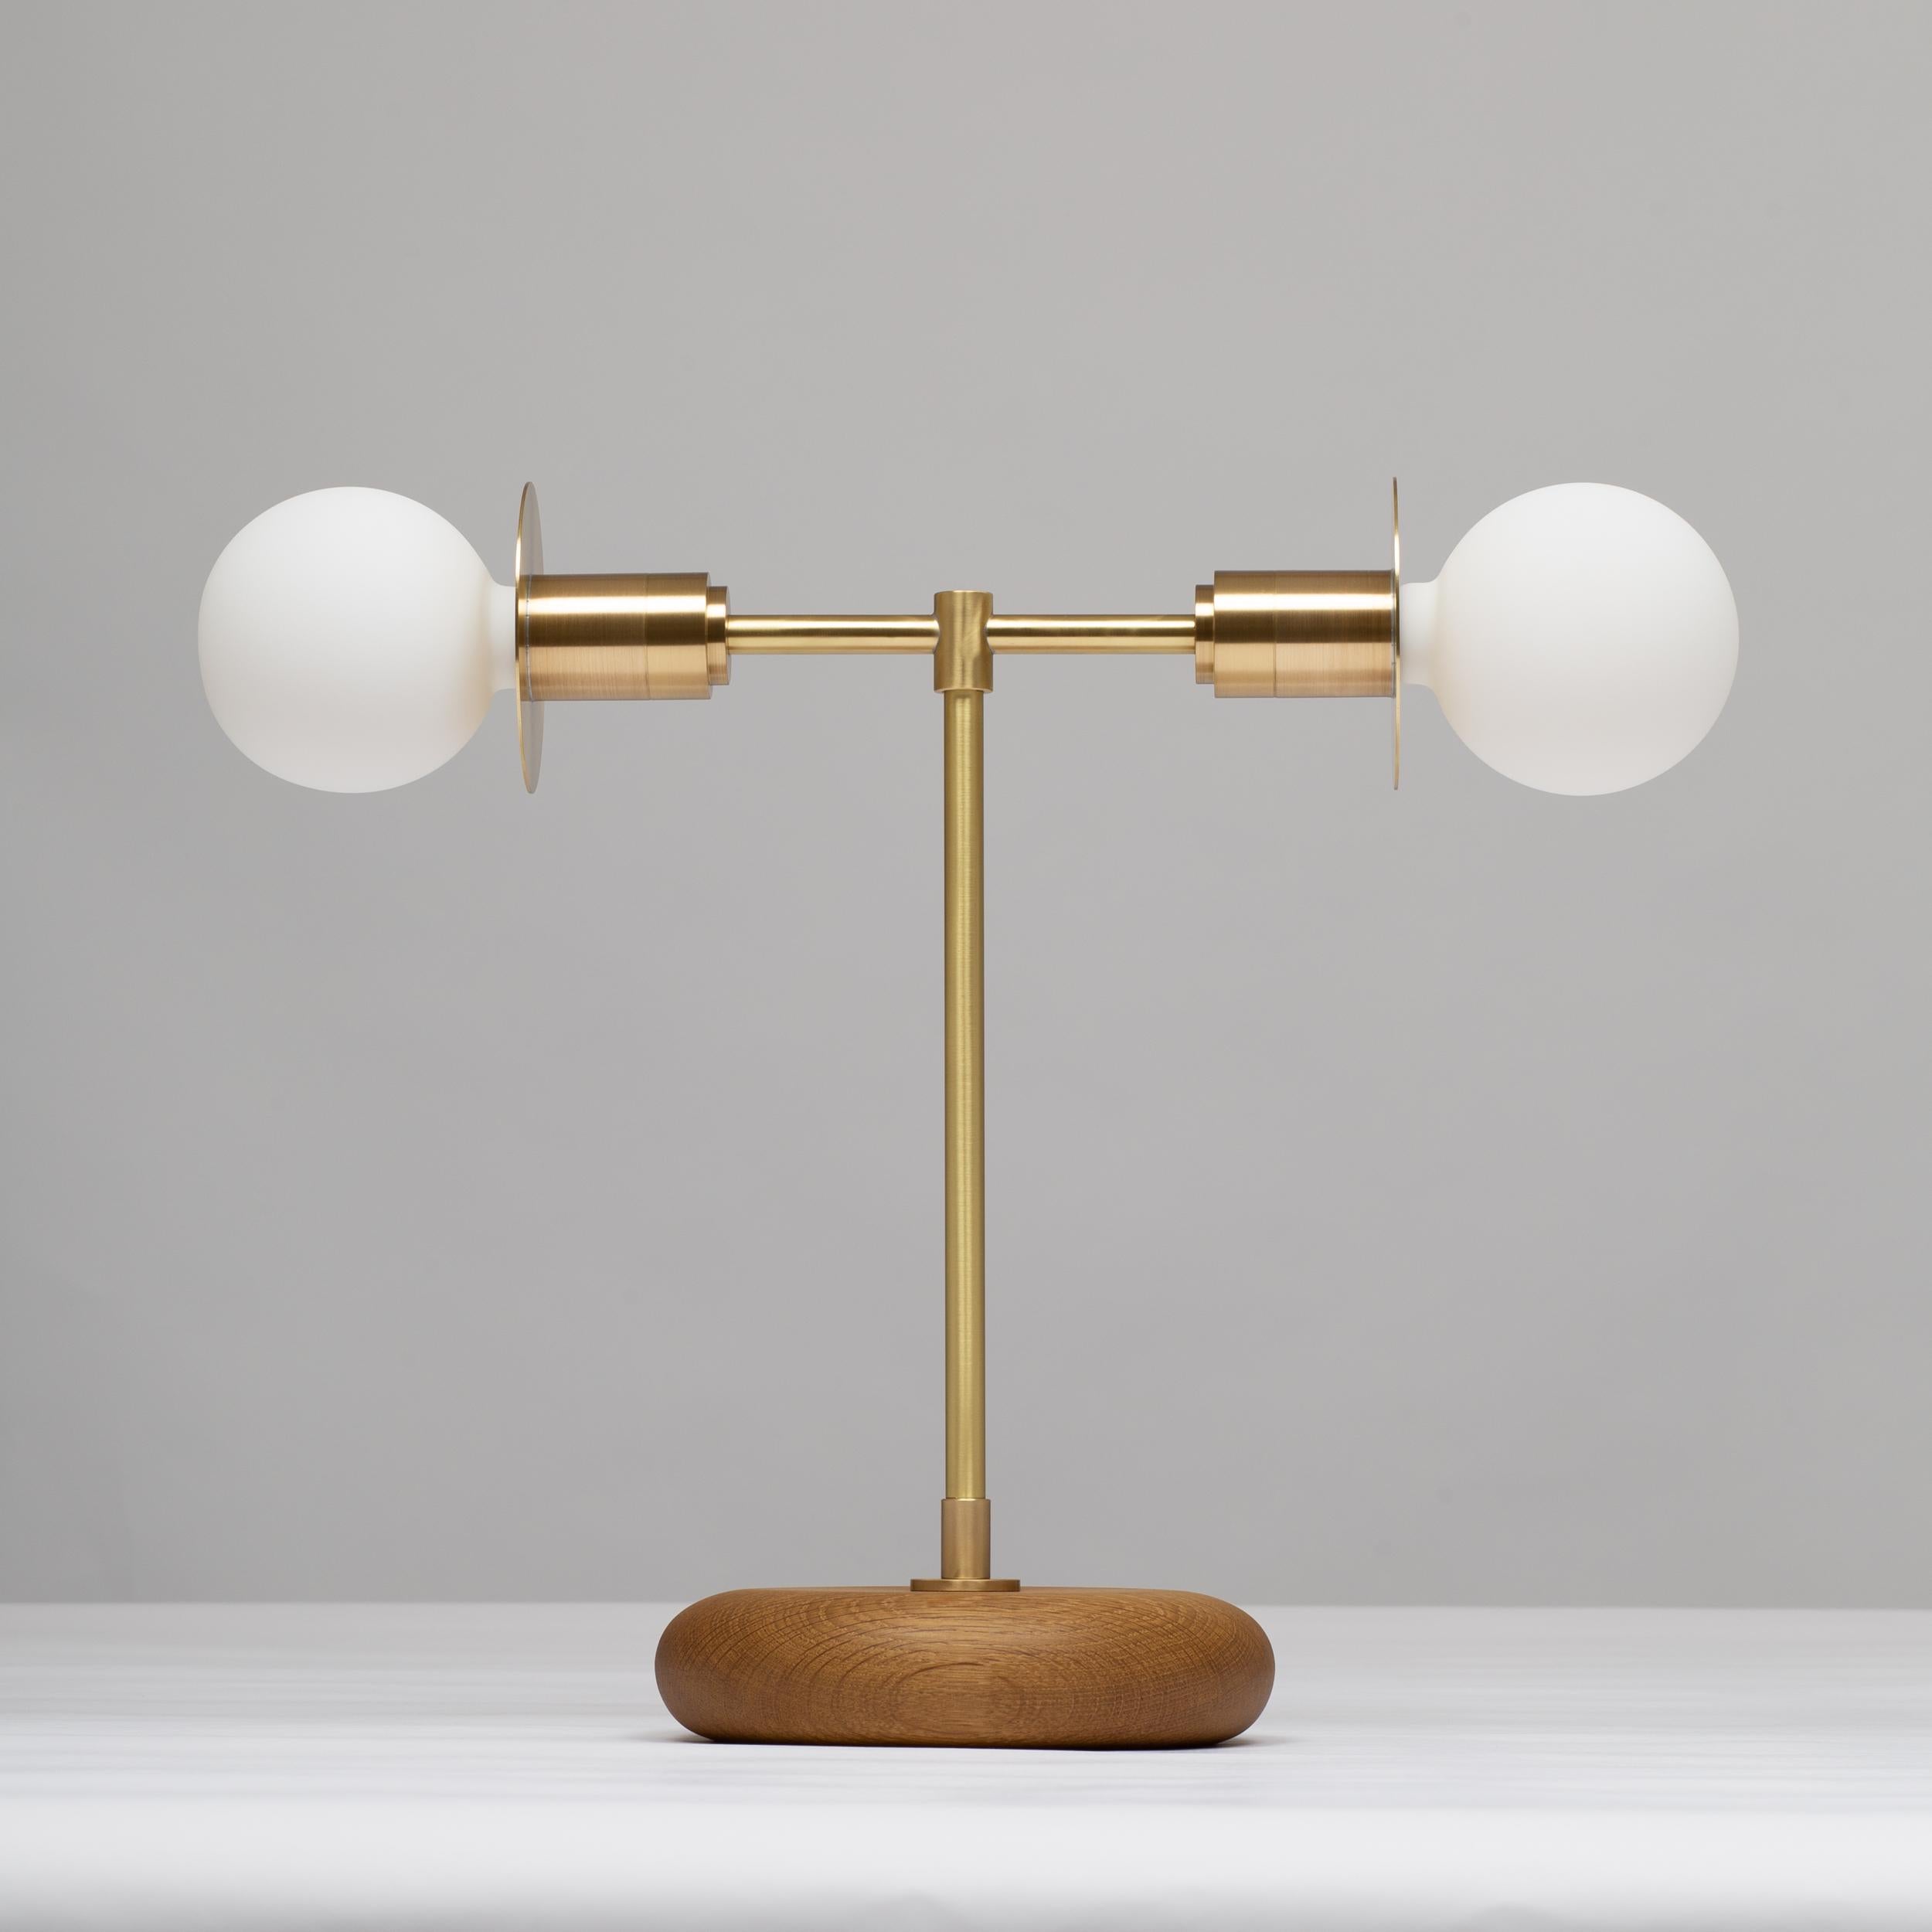 Handturned English Smoked Oak Pebble Table Lamp. Pure Monocoat natural oil finish.
Solid brass, Satin finish. Spun Brass Discs. Lacquered. 
Inline LED dimmer. Linen Fabric Cable.
2000K - 2800K  95CRI
1200 Dim to Warm Lumens
Sphere III bulbs